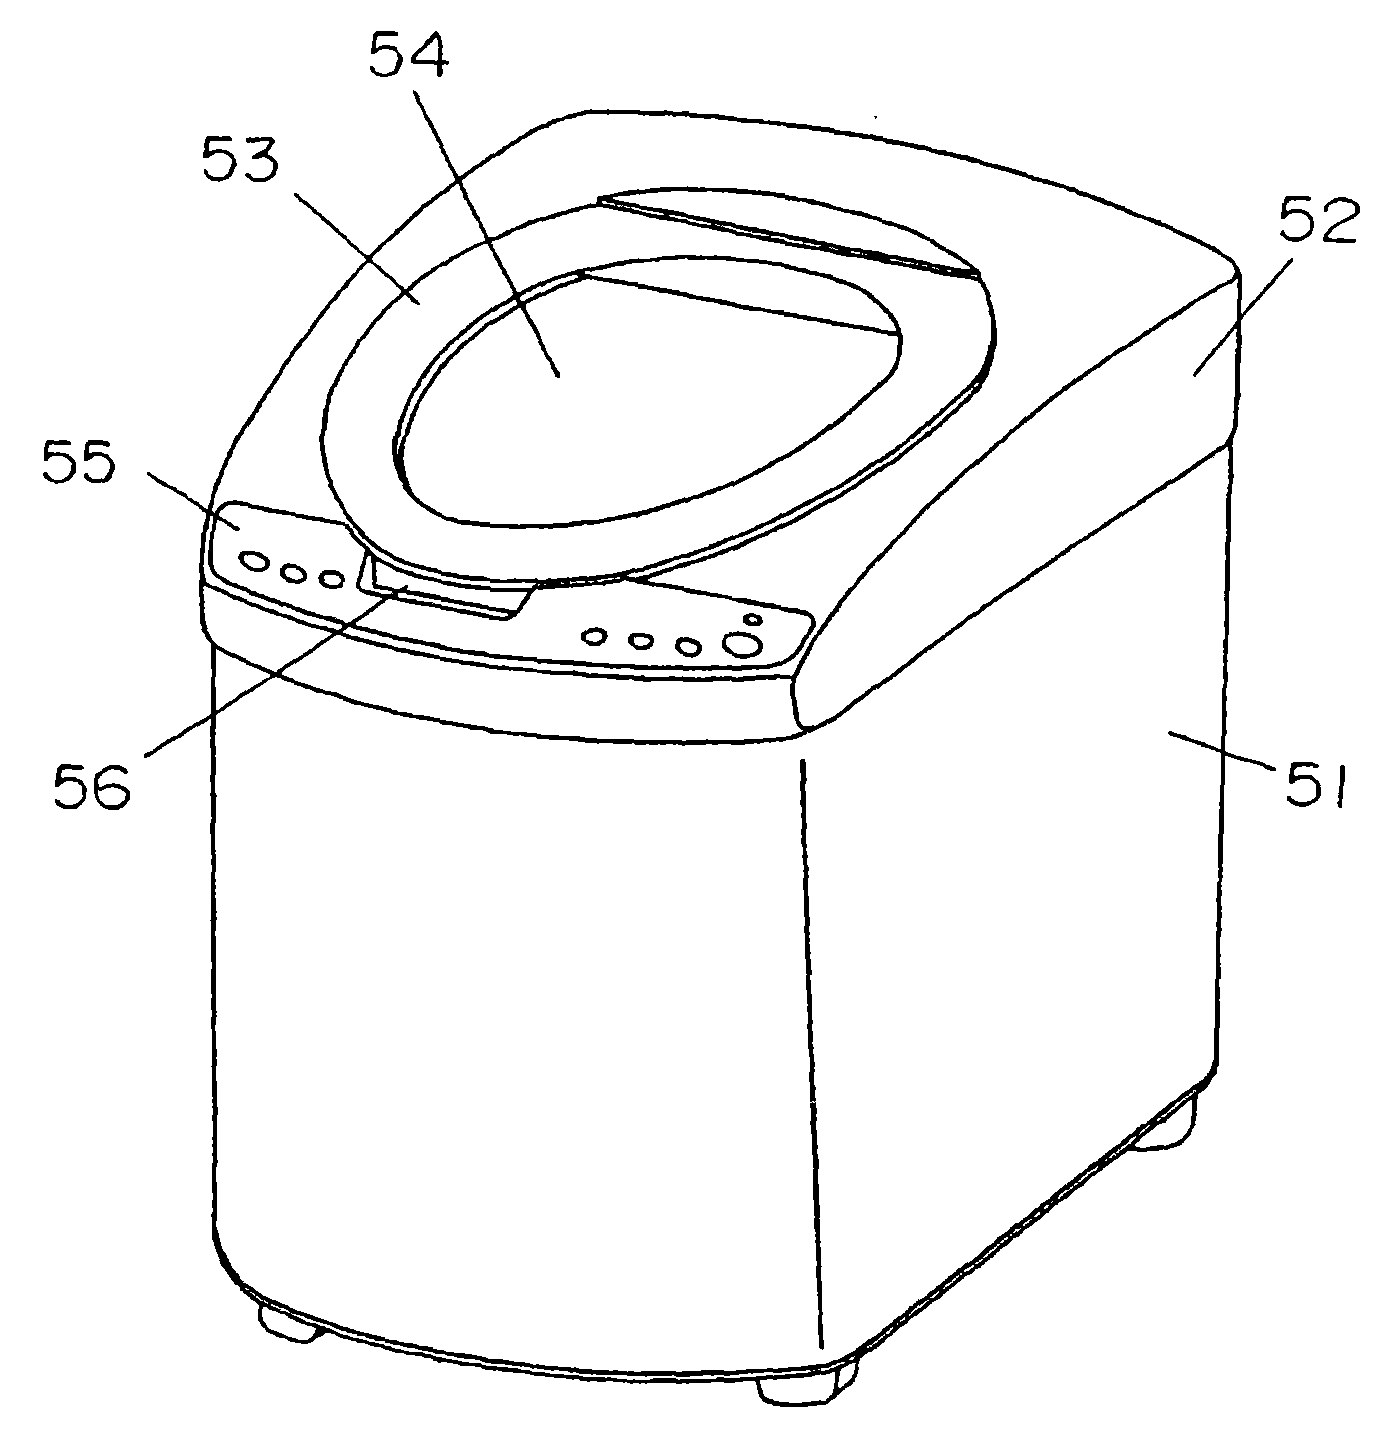 Washing machine cover structure